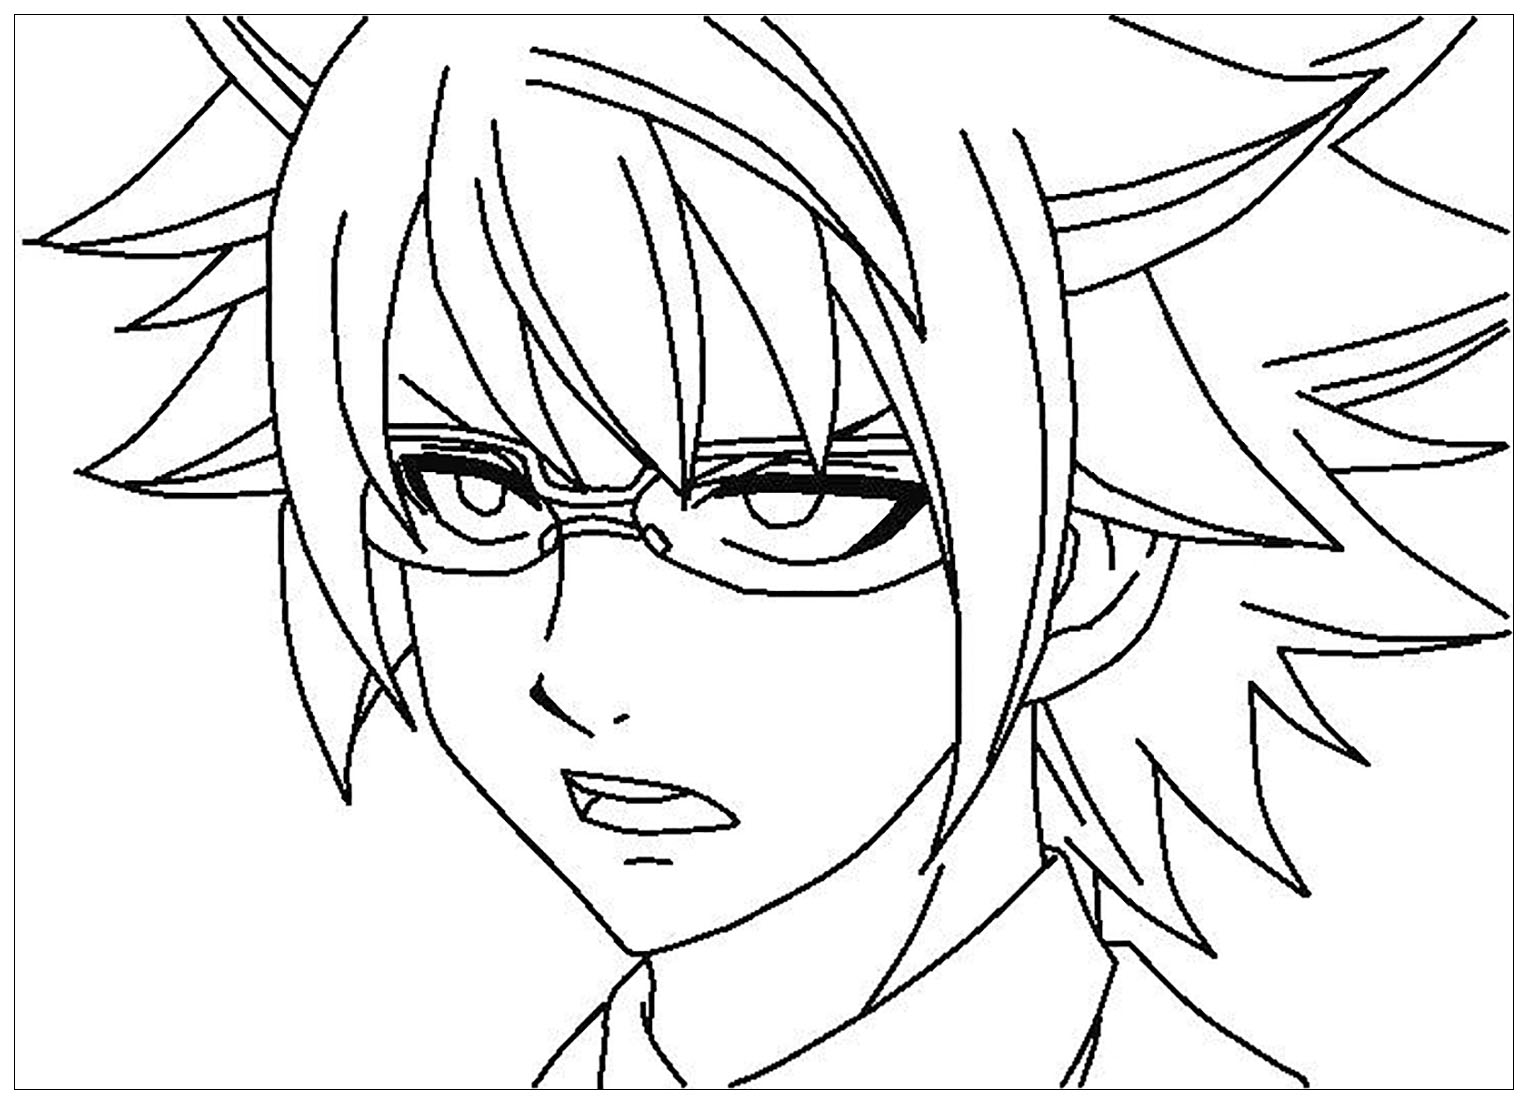 Fairy tail free to color for kids - Fairy tail Kids Coloring Pages